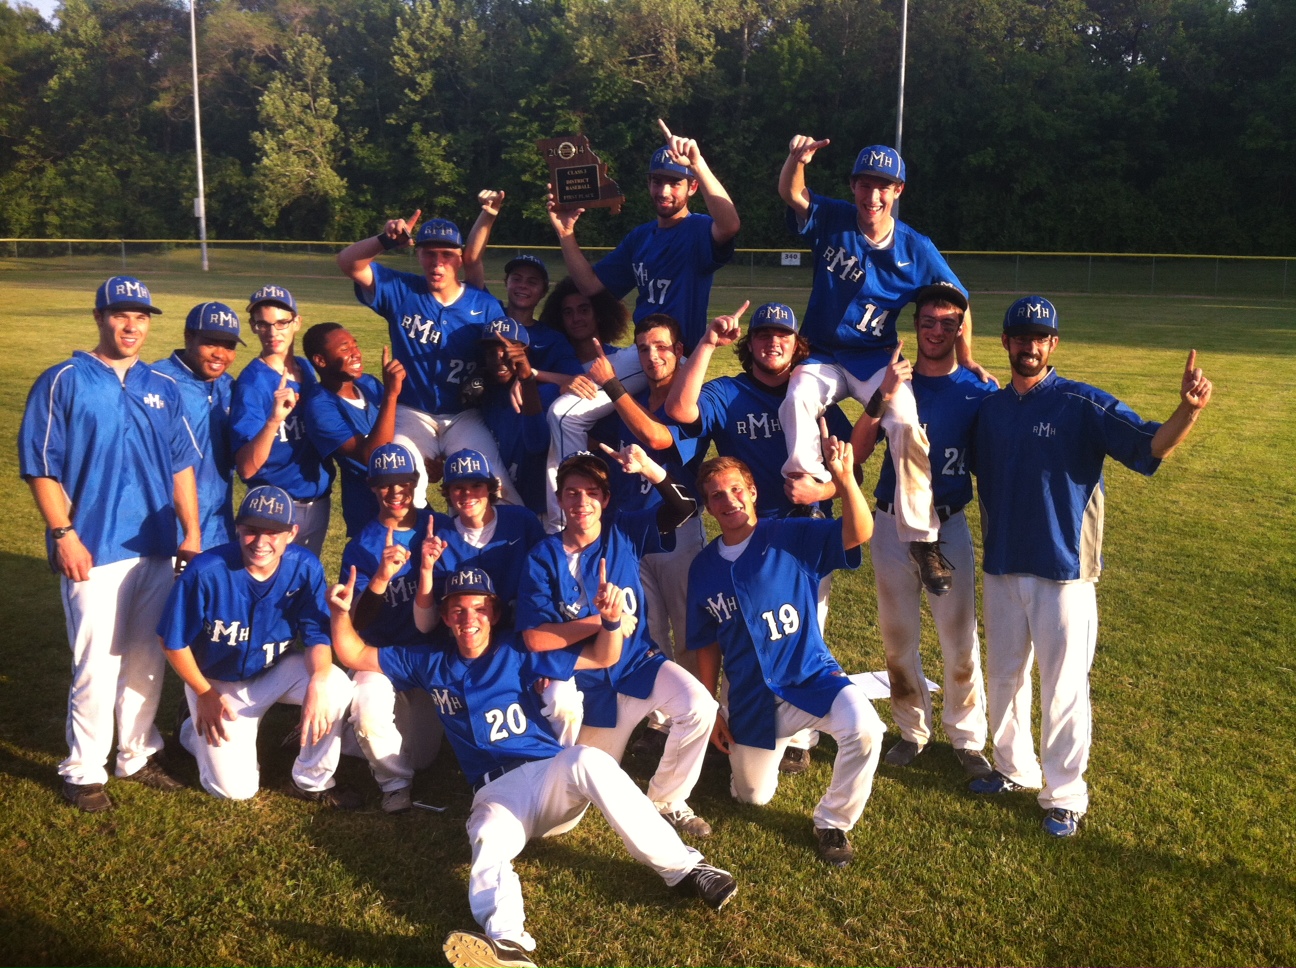 MRH baseball takes Districts over Brentwood: been a while